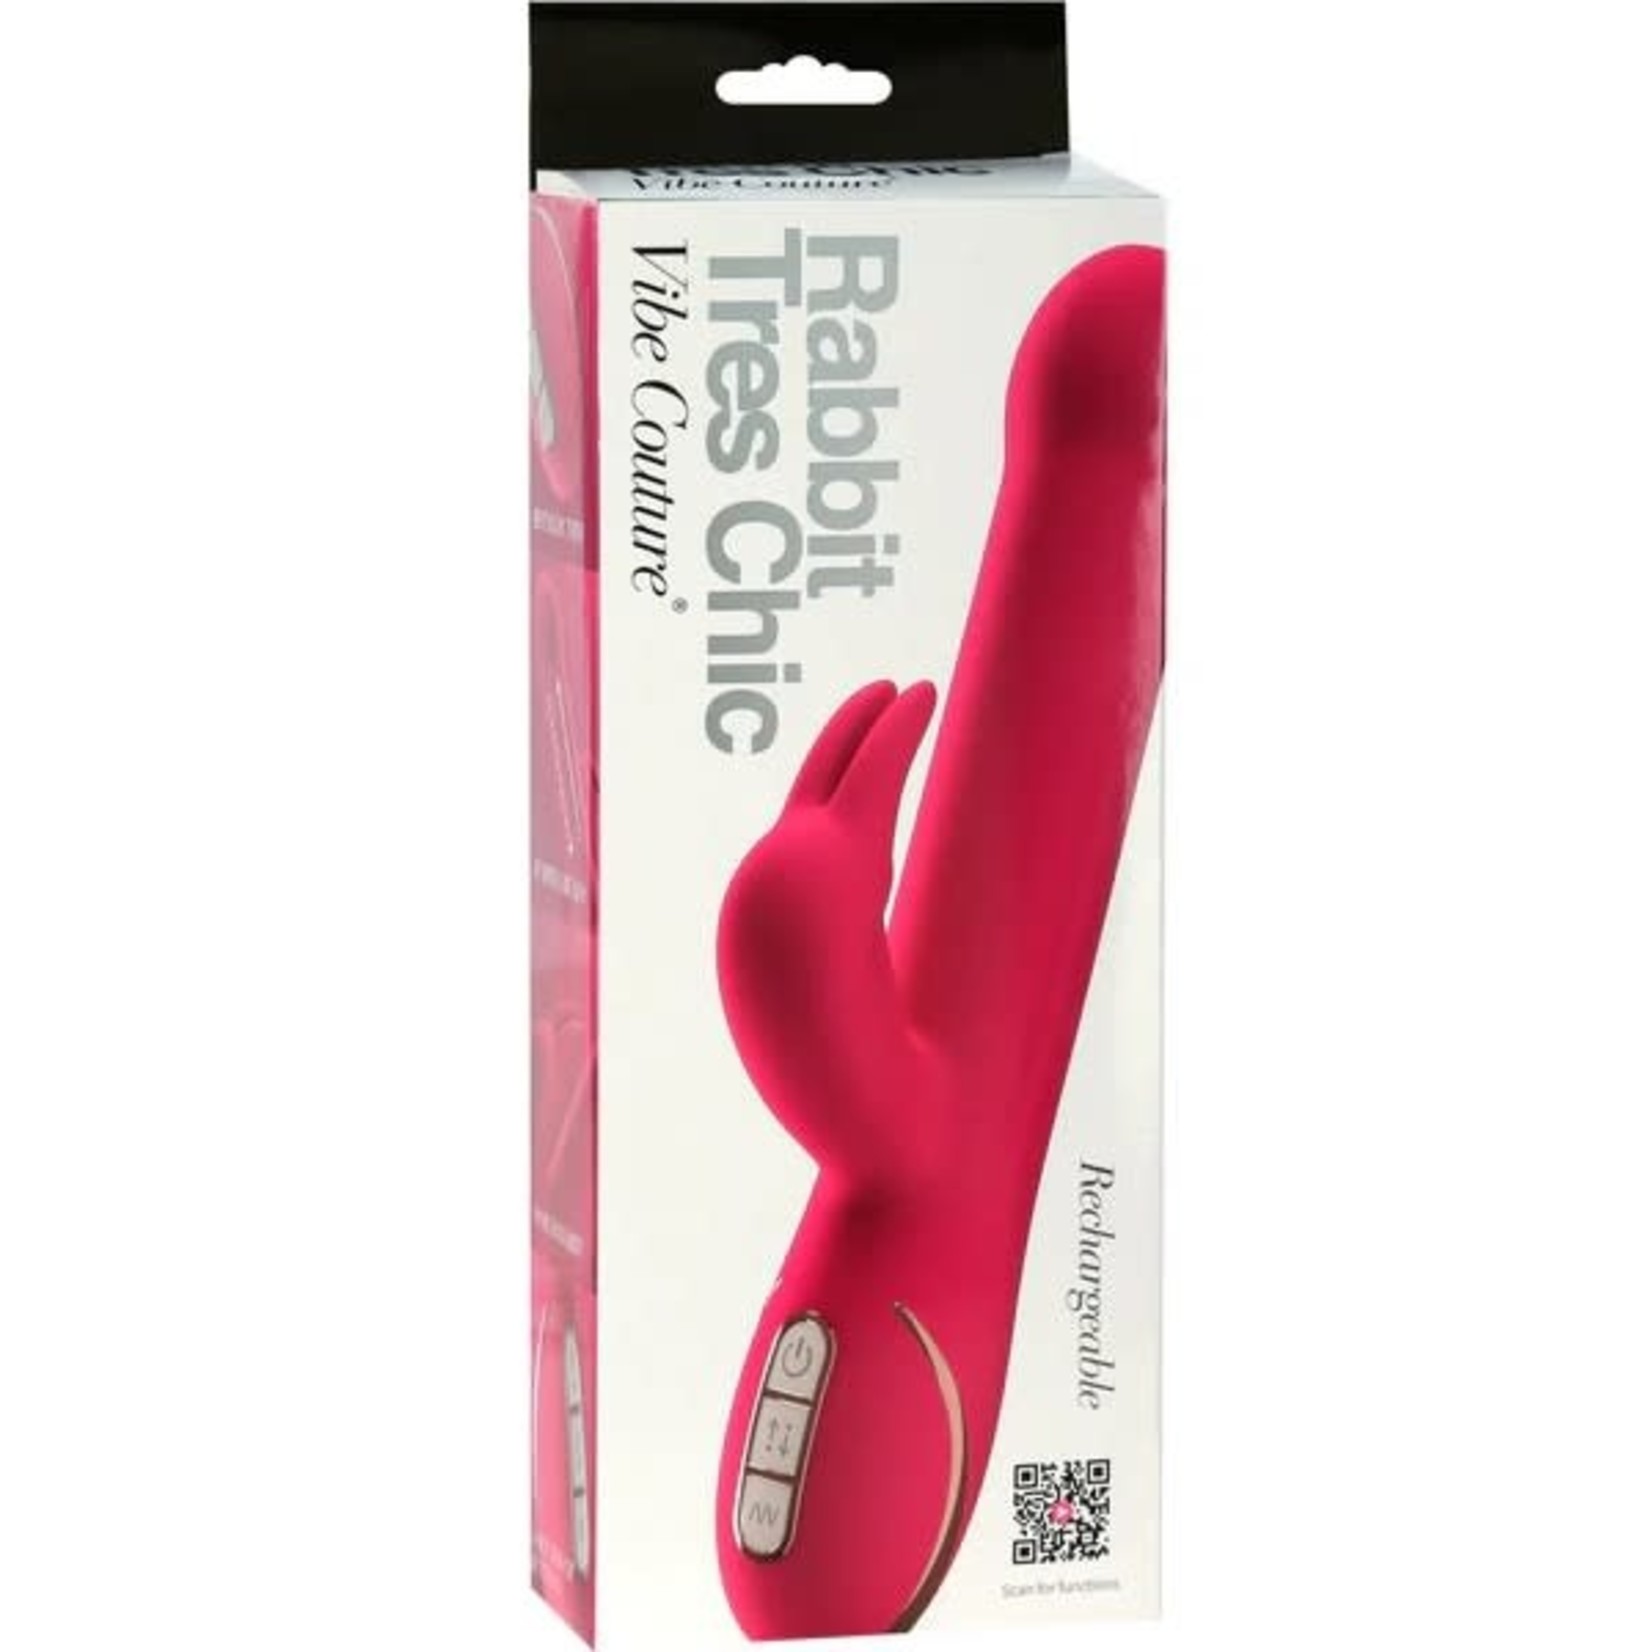 VIBE COUTURE RABBIT TRES CHIC RECHARGEABLE VIBRATOR - PINK